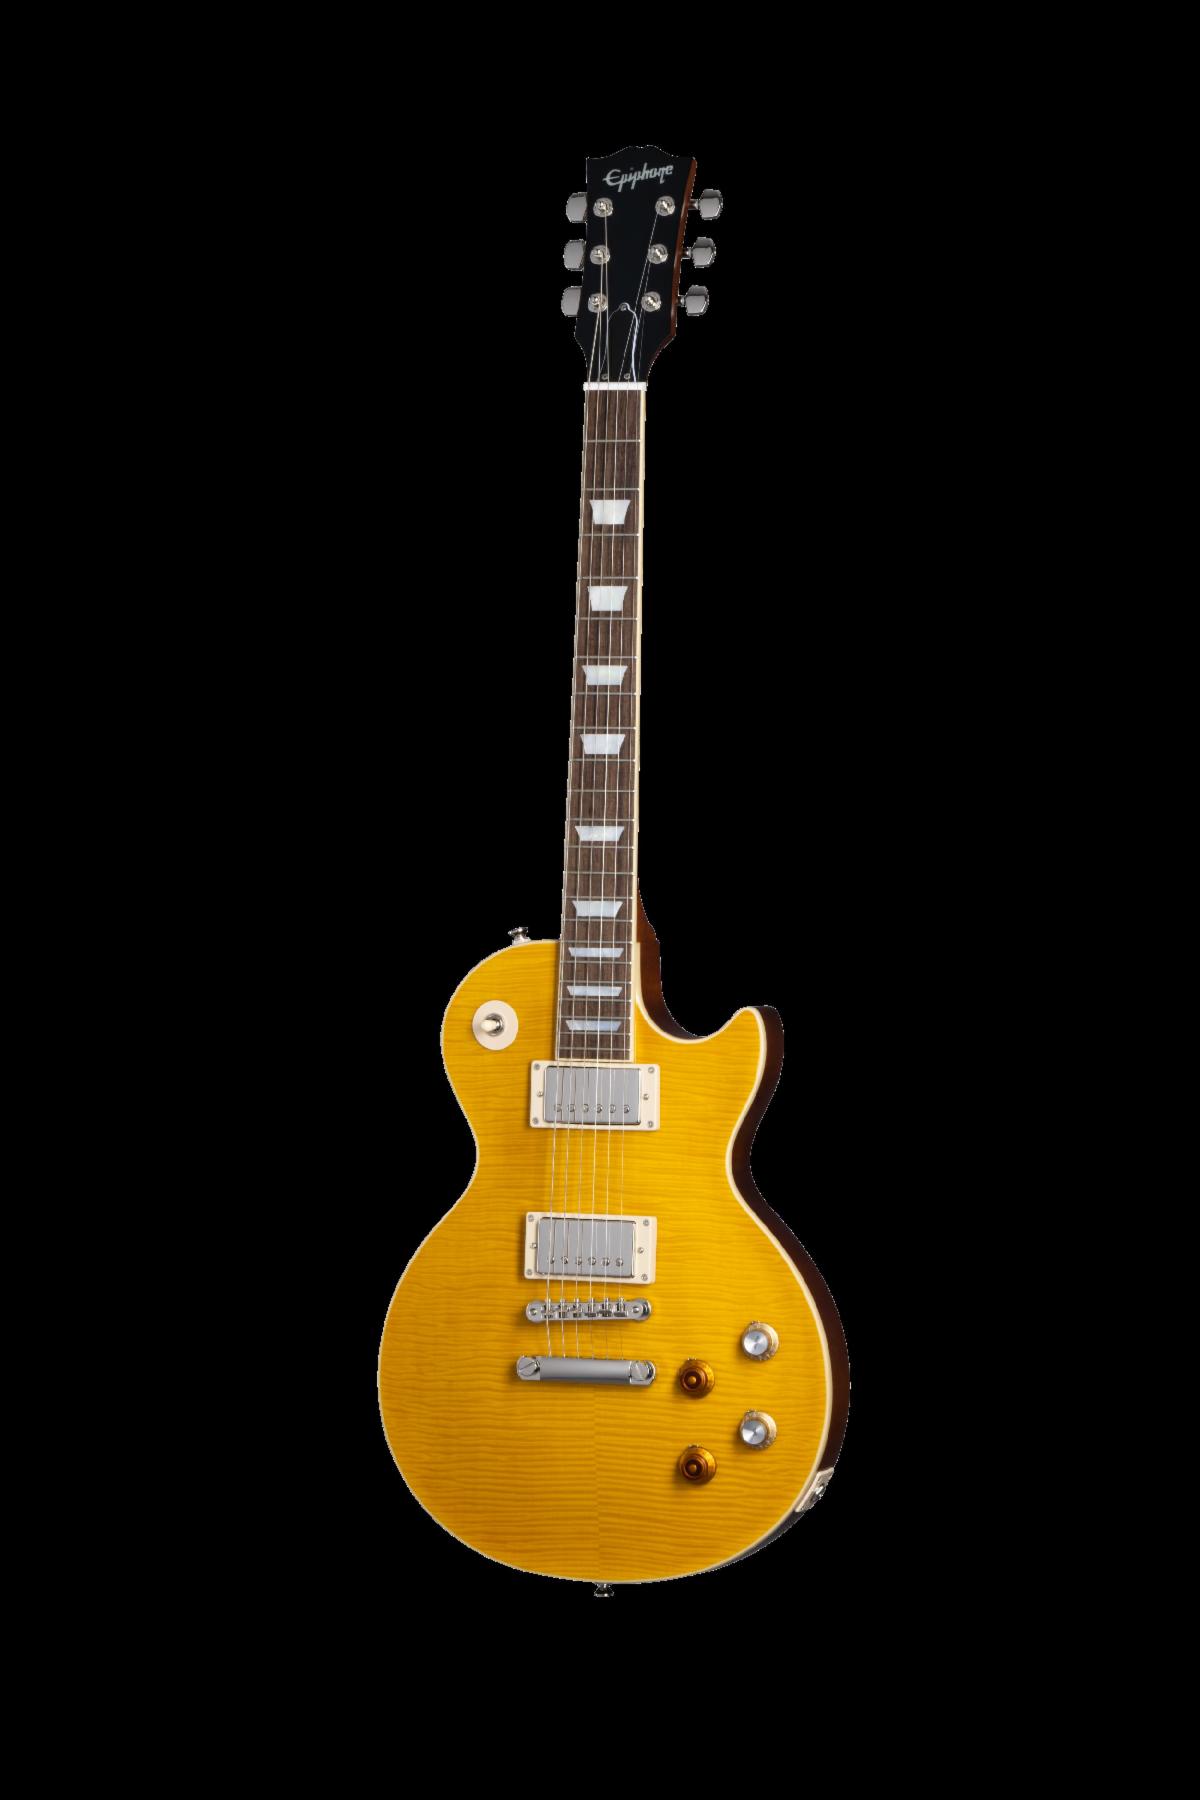 Kirk Hammett of Metallica and Epiphone Unveil the Epiphone “Greeny” 1959 Les Paul Standard, Available Worldwide on Epiphone.com